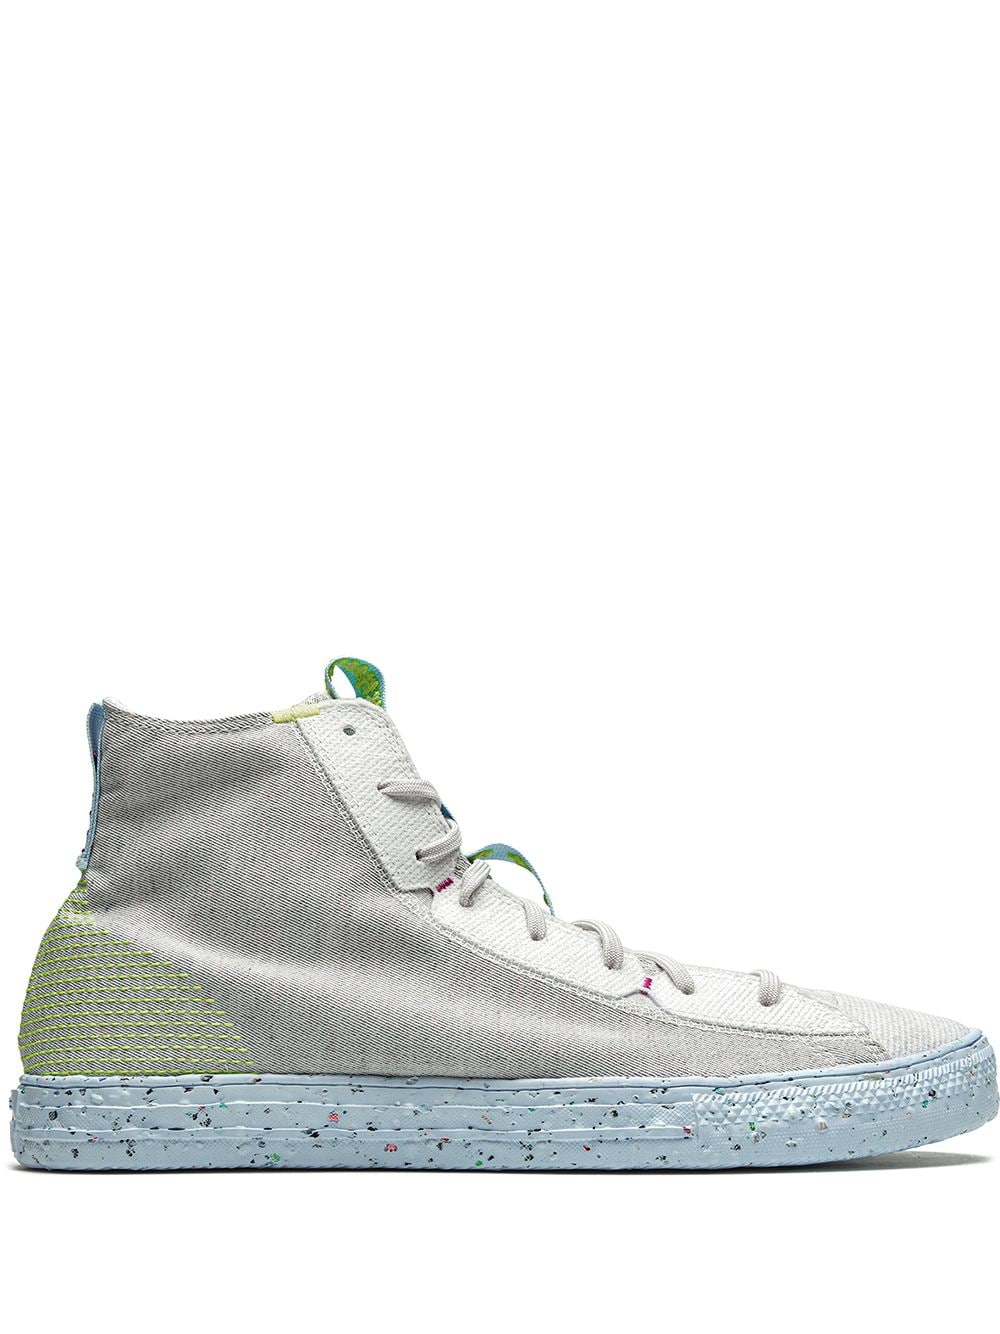 Converse Chuck Taylor All-Star "Space Hippie - Crater White" sneakers von Converse